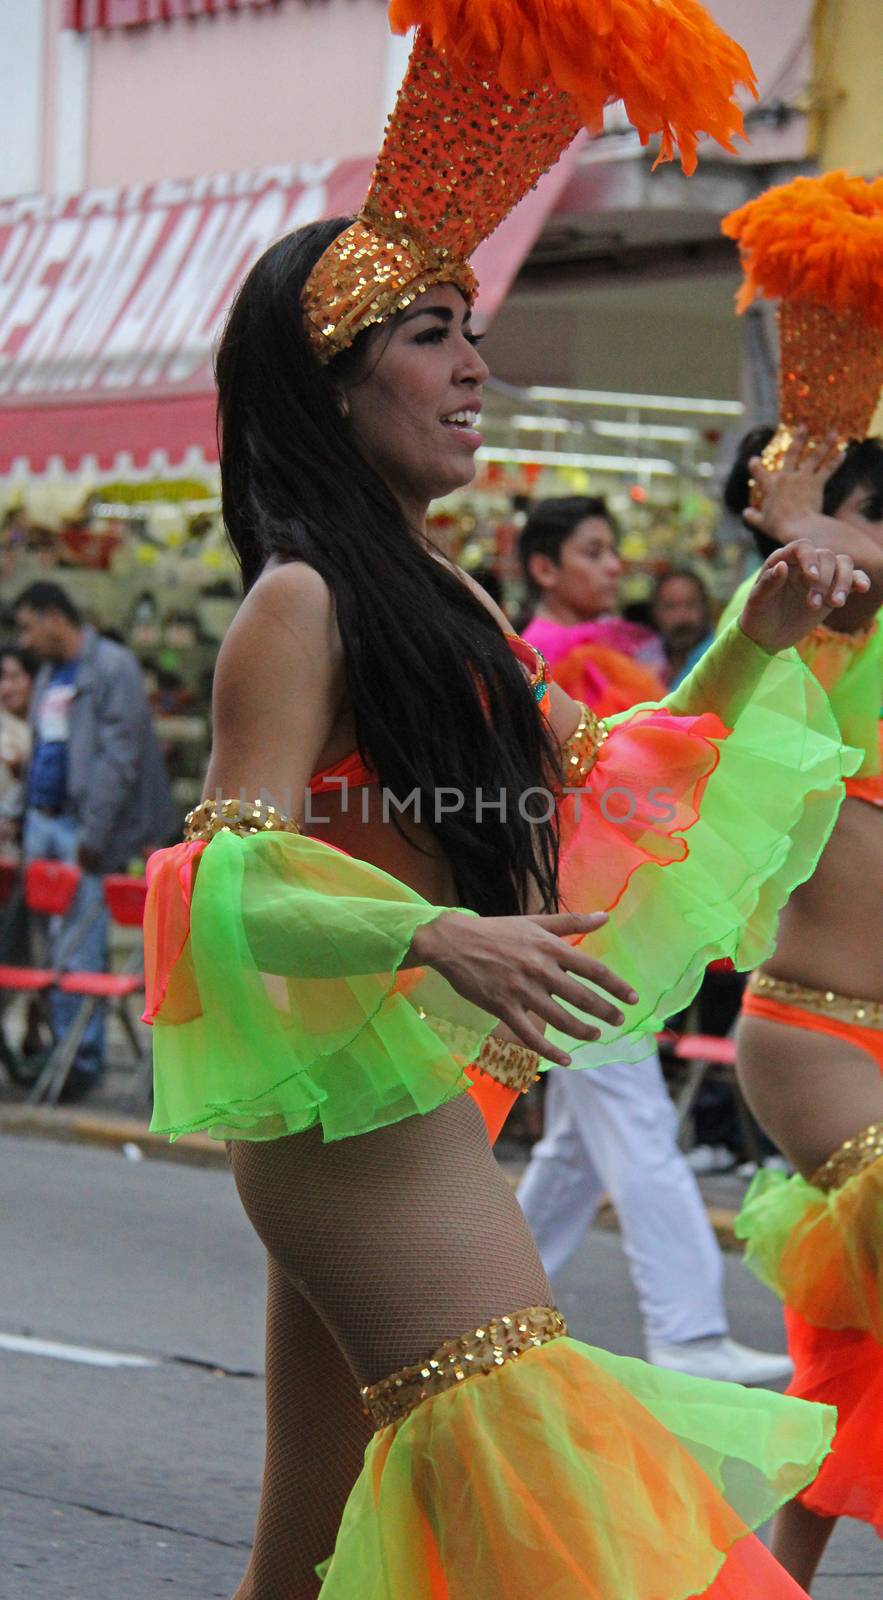 Dancers performing at a parade during a carnaval in Veracruz, Mexico 03 Feb 2016 No model release Editorial use only